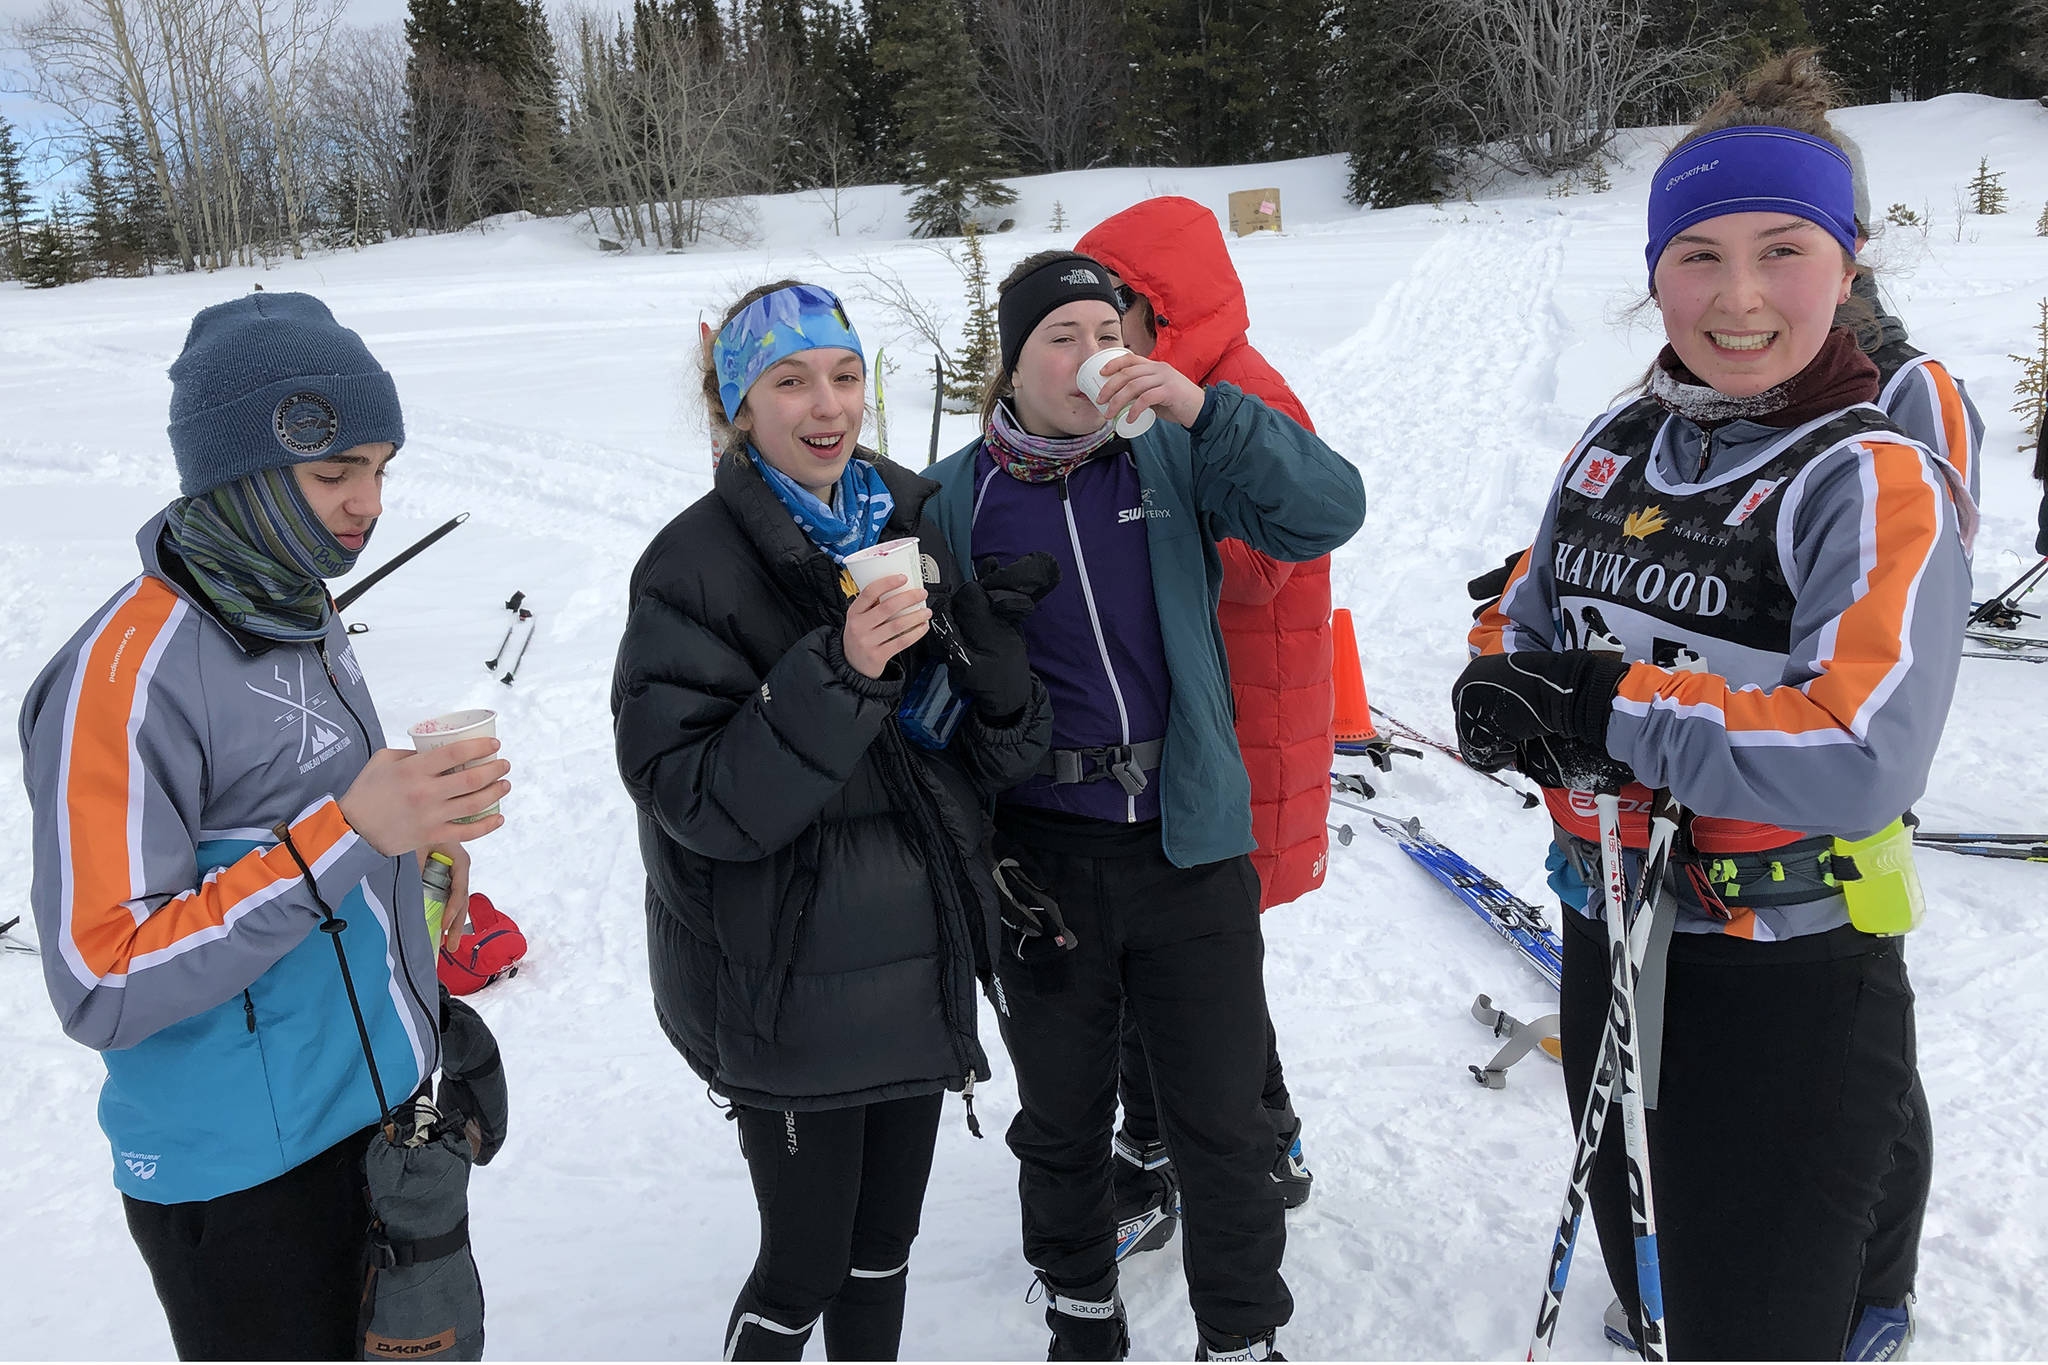 Juneau Nordic Ski Team’s Callahan Croteau, Anna Iverson, Eva Goering and Katie McKenna enjoy hot blueberry soup at the Yukon Ski Marathon 22-kilometer finish line in Whitehorse, Yukon, on Saturday, March 2, 2019. Croteau came in first in the junior male division with a time of 1 hours, 52 minutes, 44 seconds. Goering came in fourth in the senior female division with a time of 1:47:10. (Courtesy Photo | Gretchen Harrington)